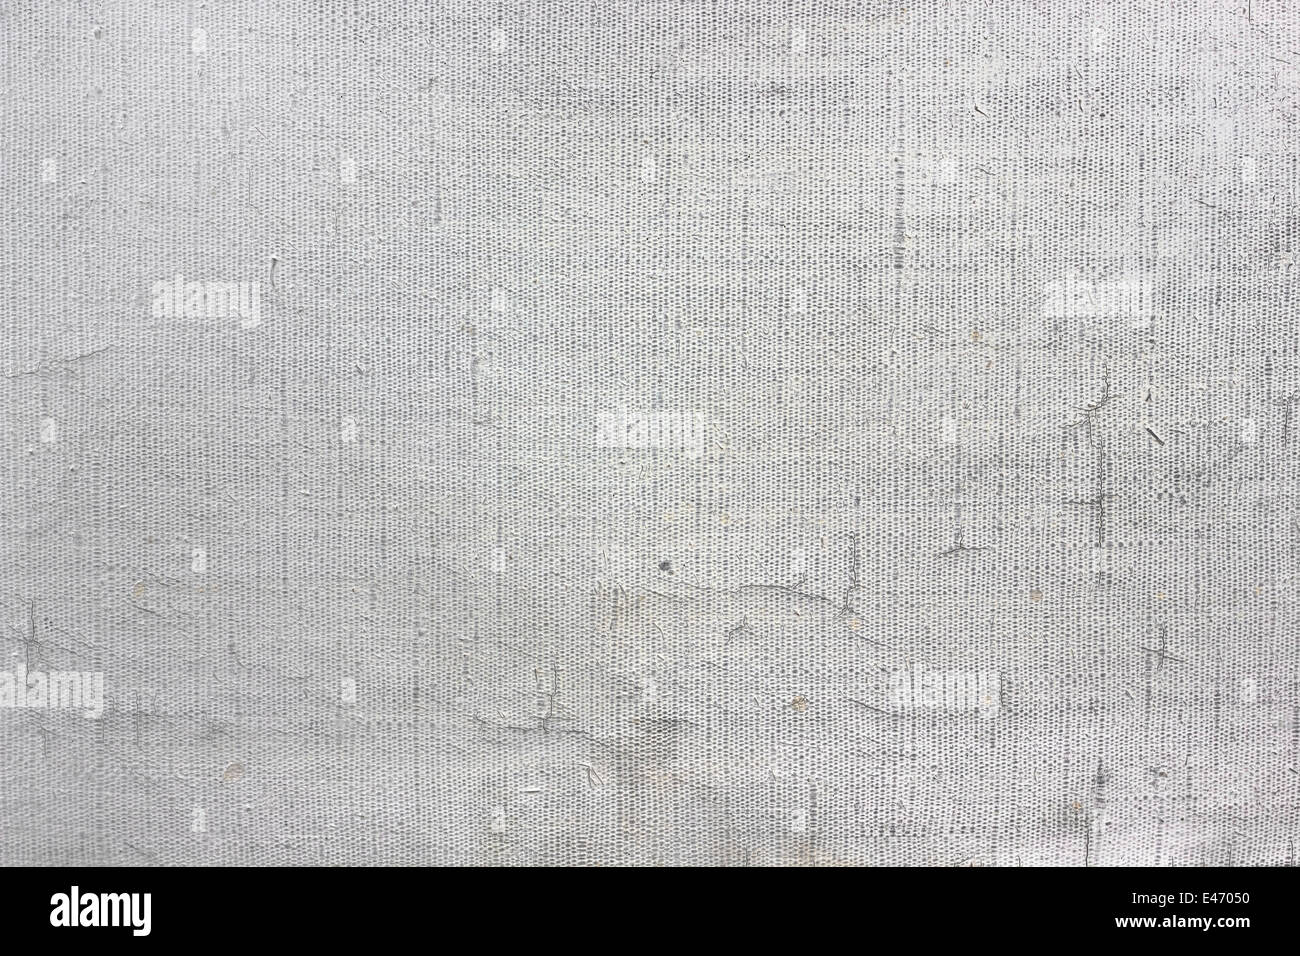 Old Empty Canvas Primed White Oil Paint Background Texture Macro Stock Photo Alamy